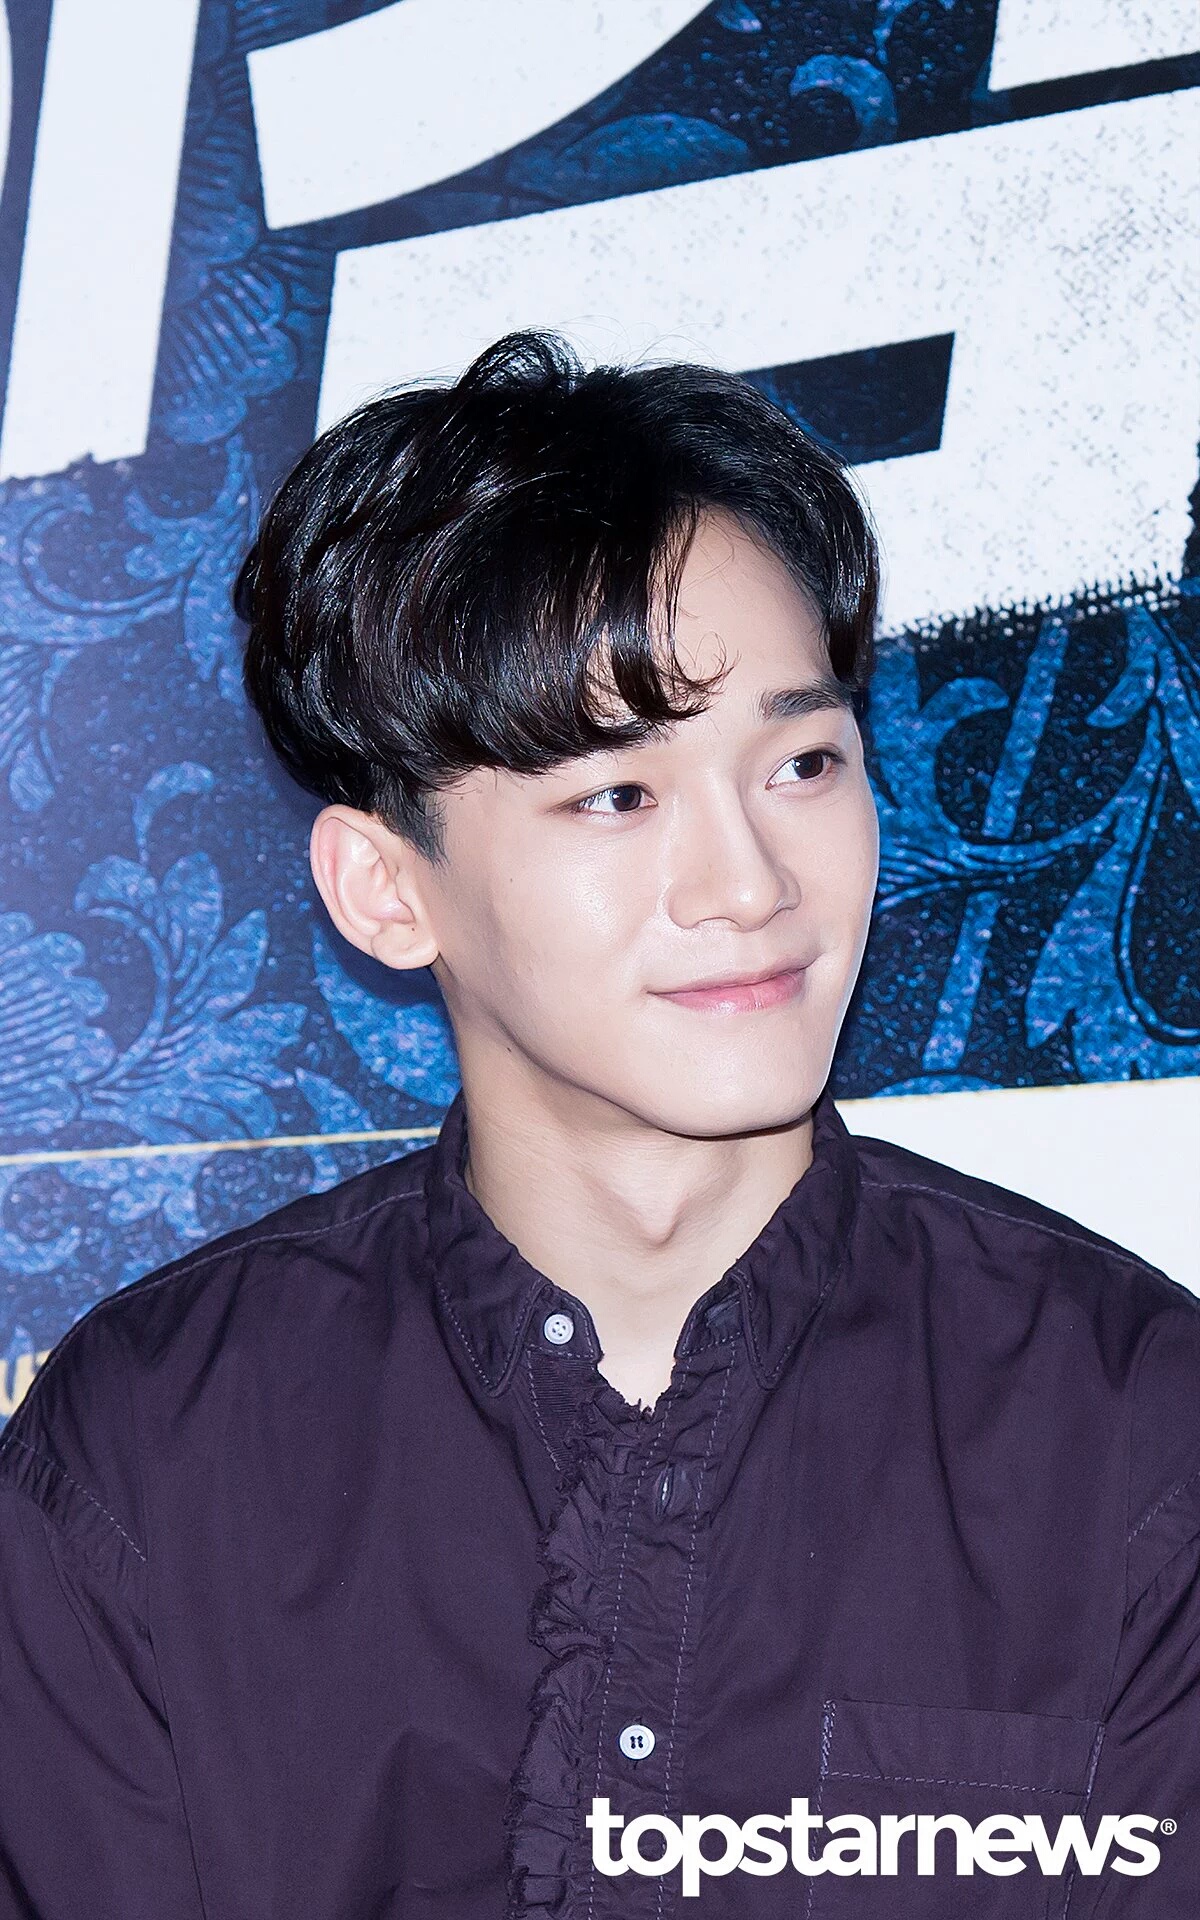 [pann] today EXO Chen's comma hair style and handsomeness ...